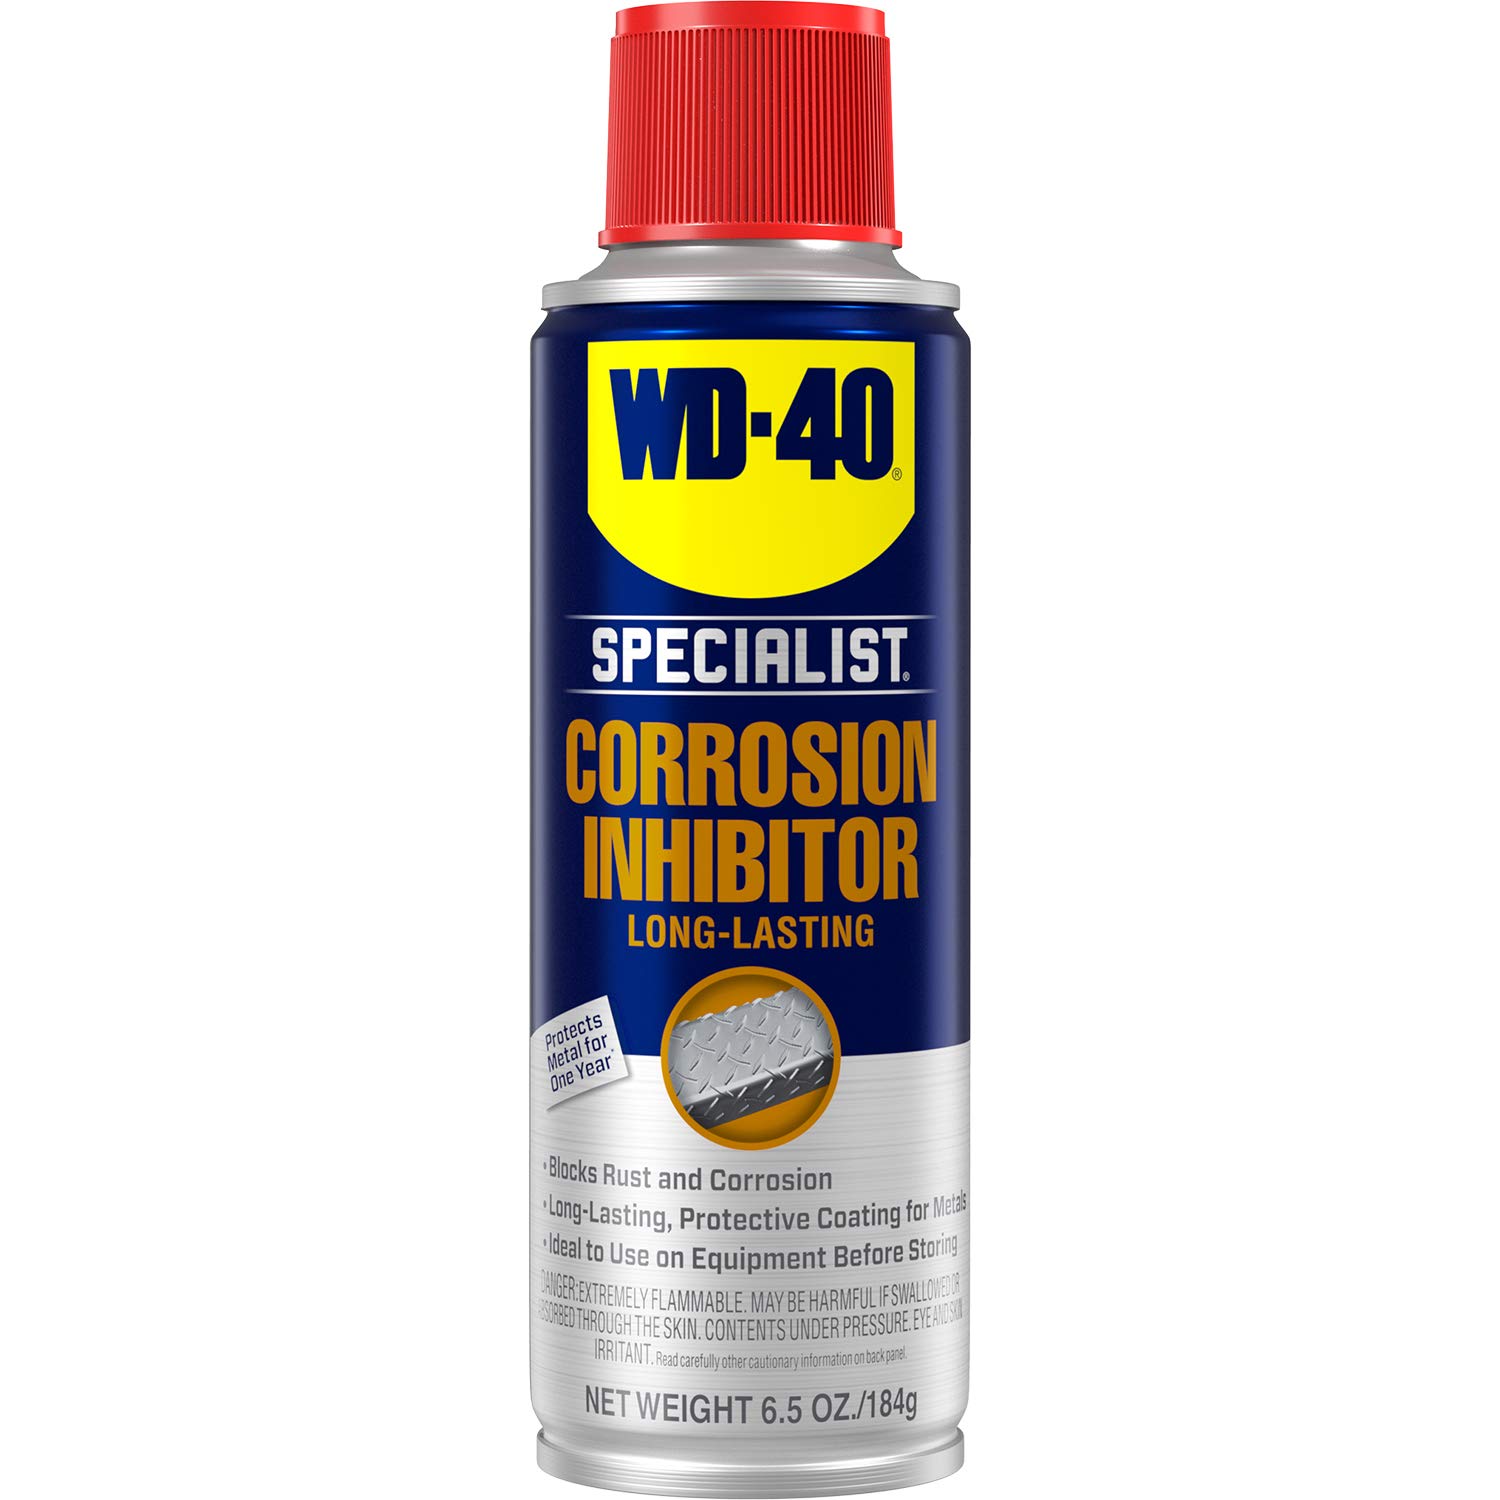 WD-40 Specialist Corrosion Inhibitor, Long-Lasting [...]